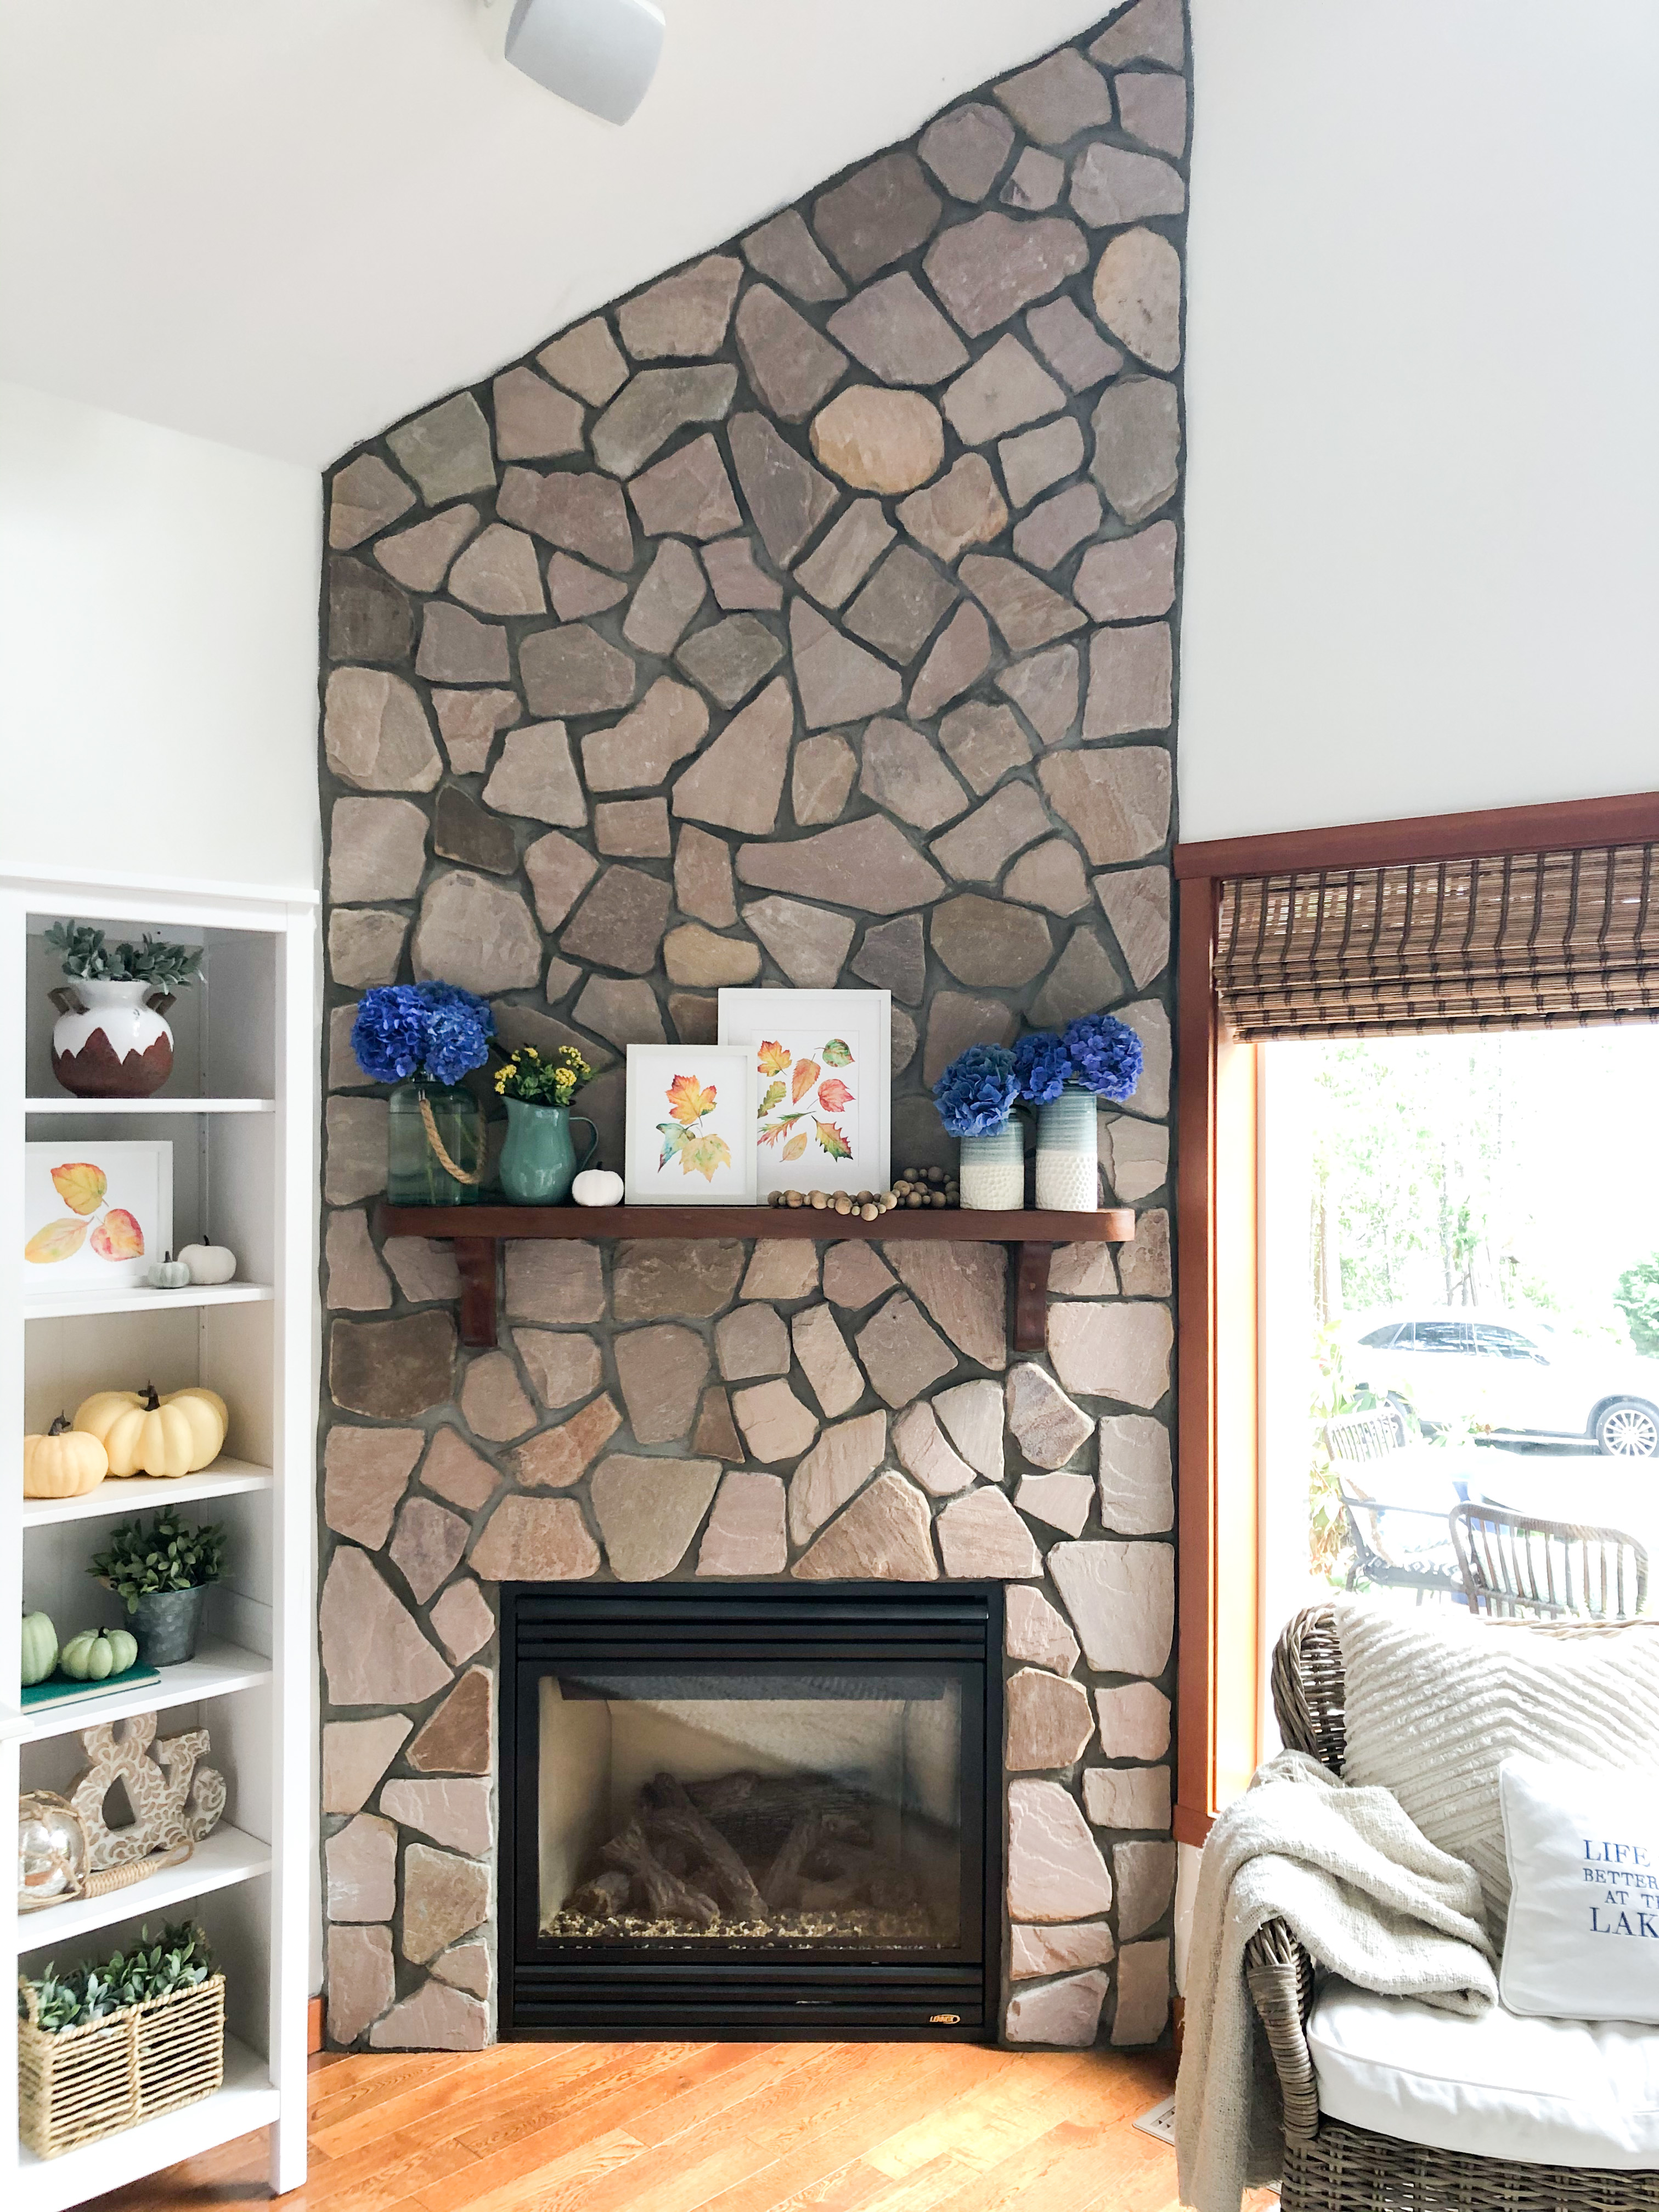 A natural stone fireplace.